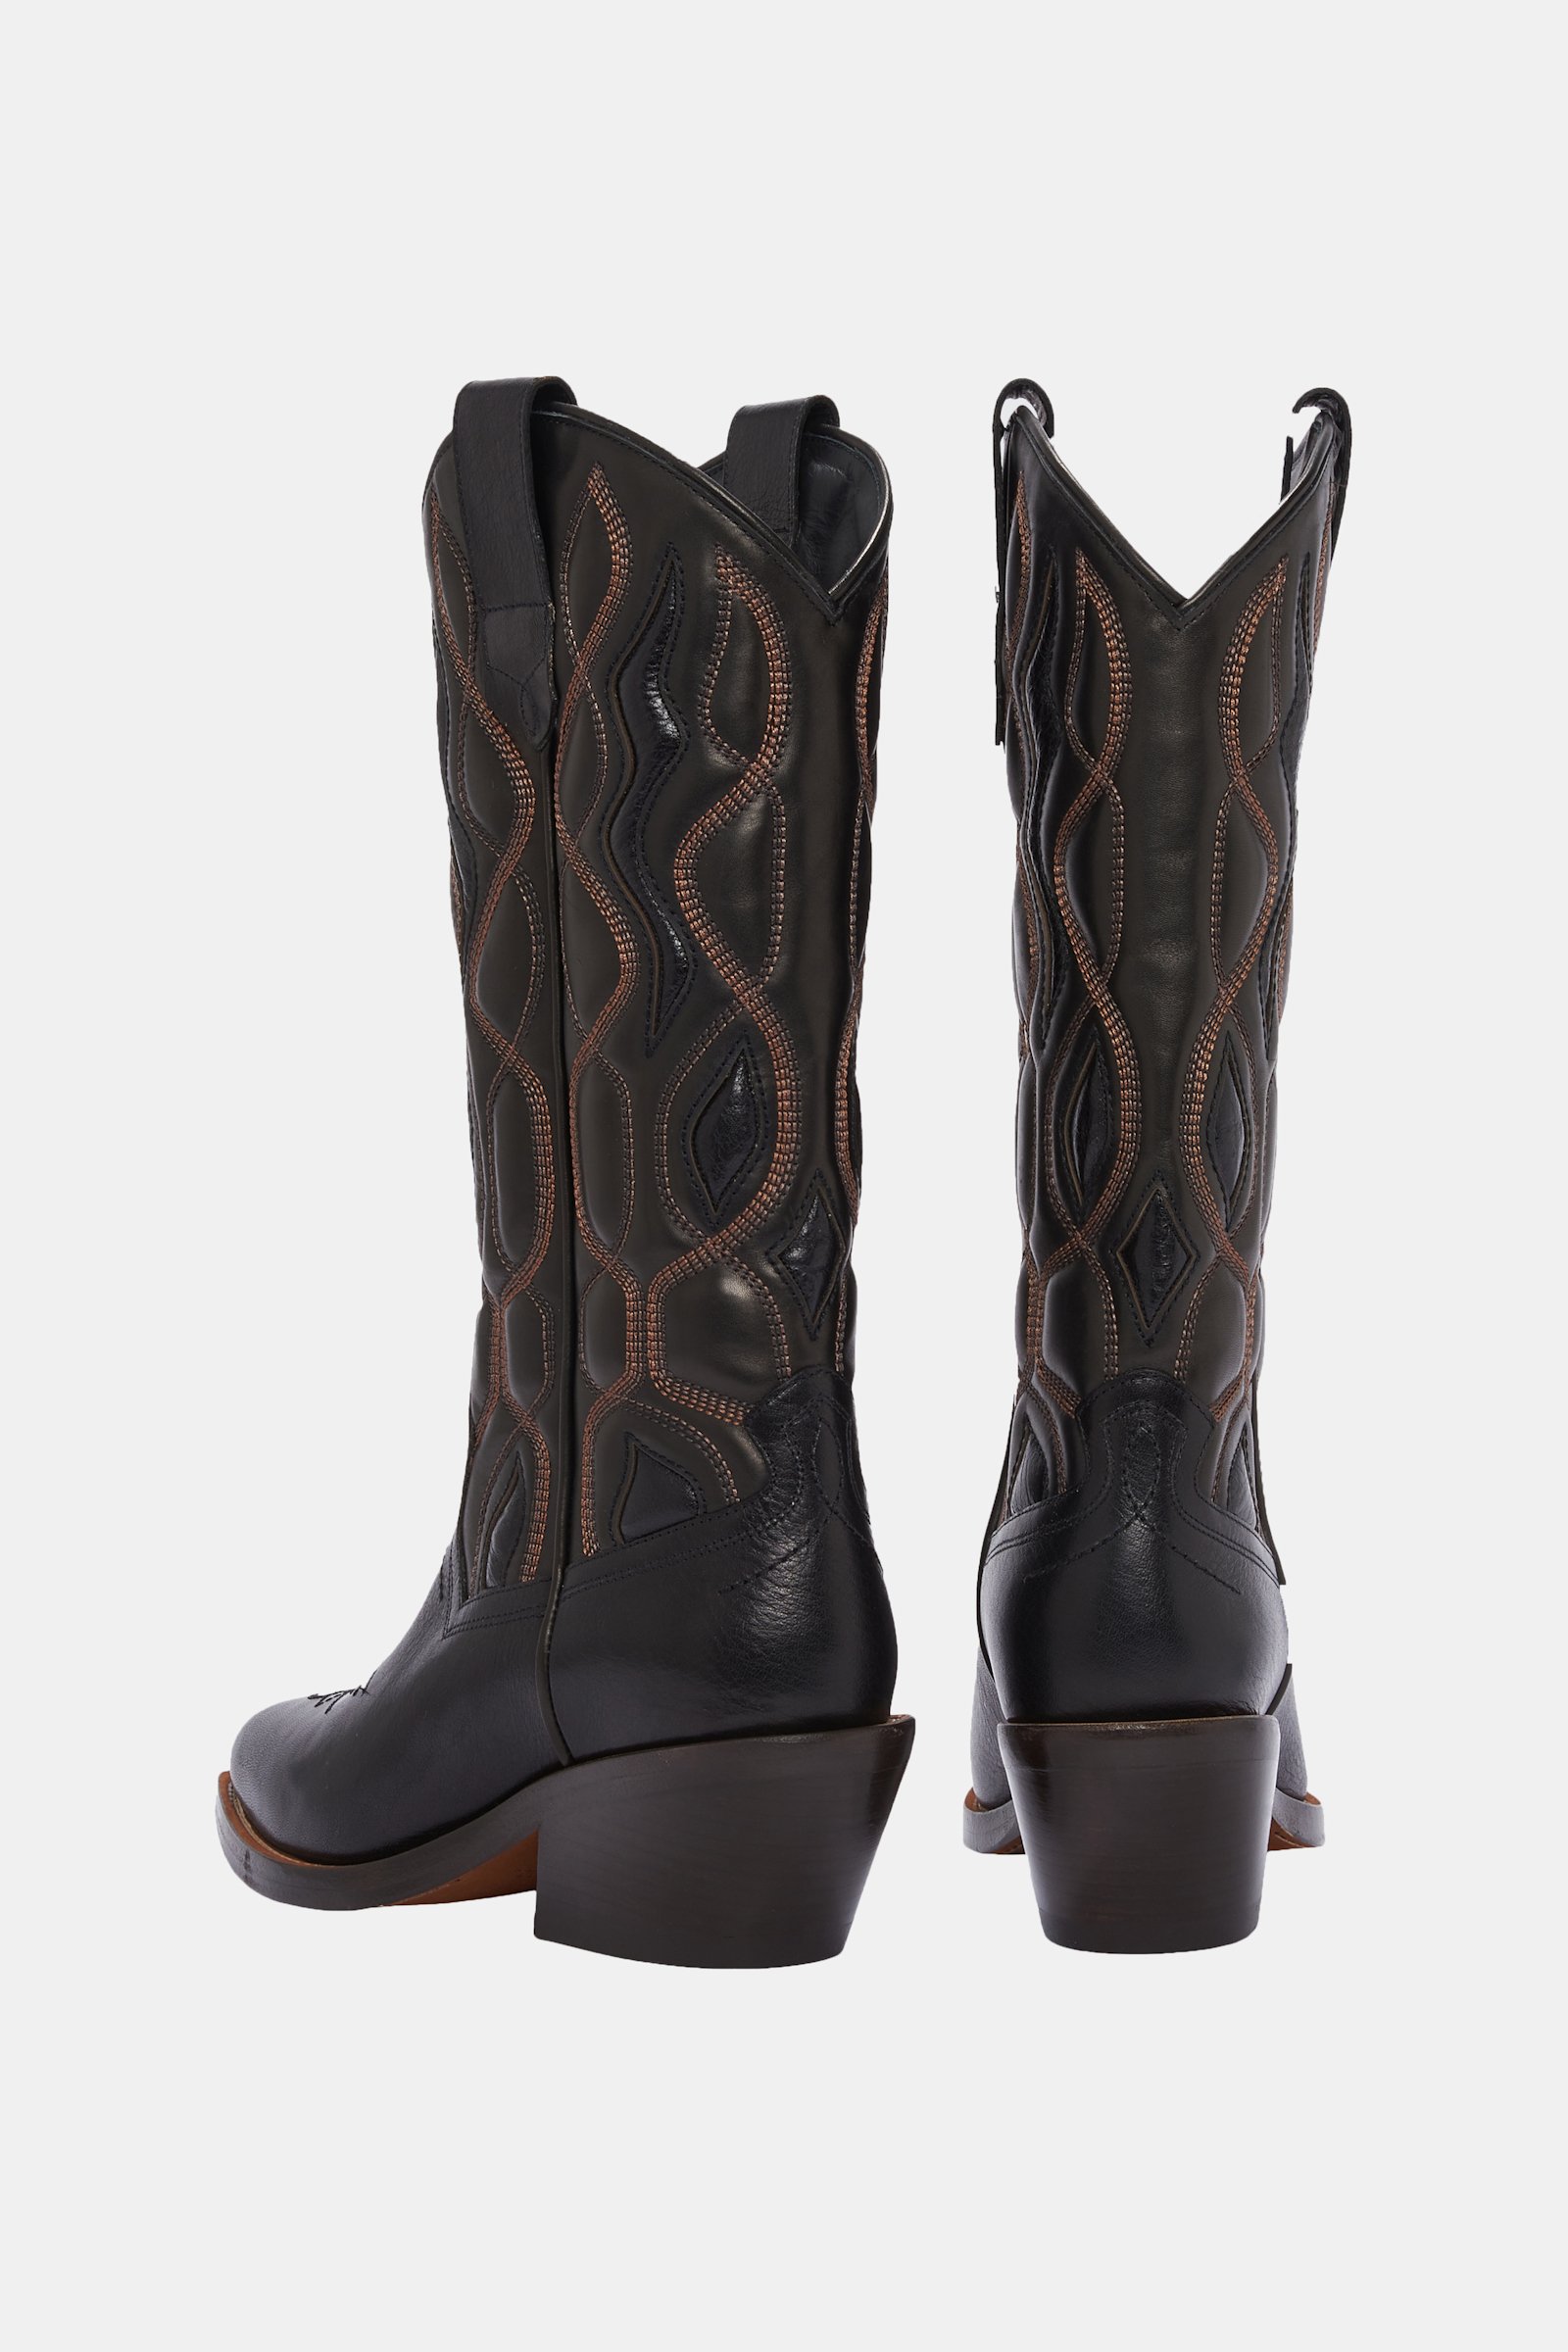 Dorothee Schumacher Embroidered cowboy boots brown and black mix